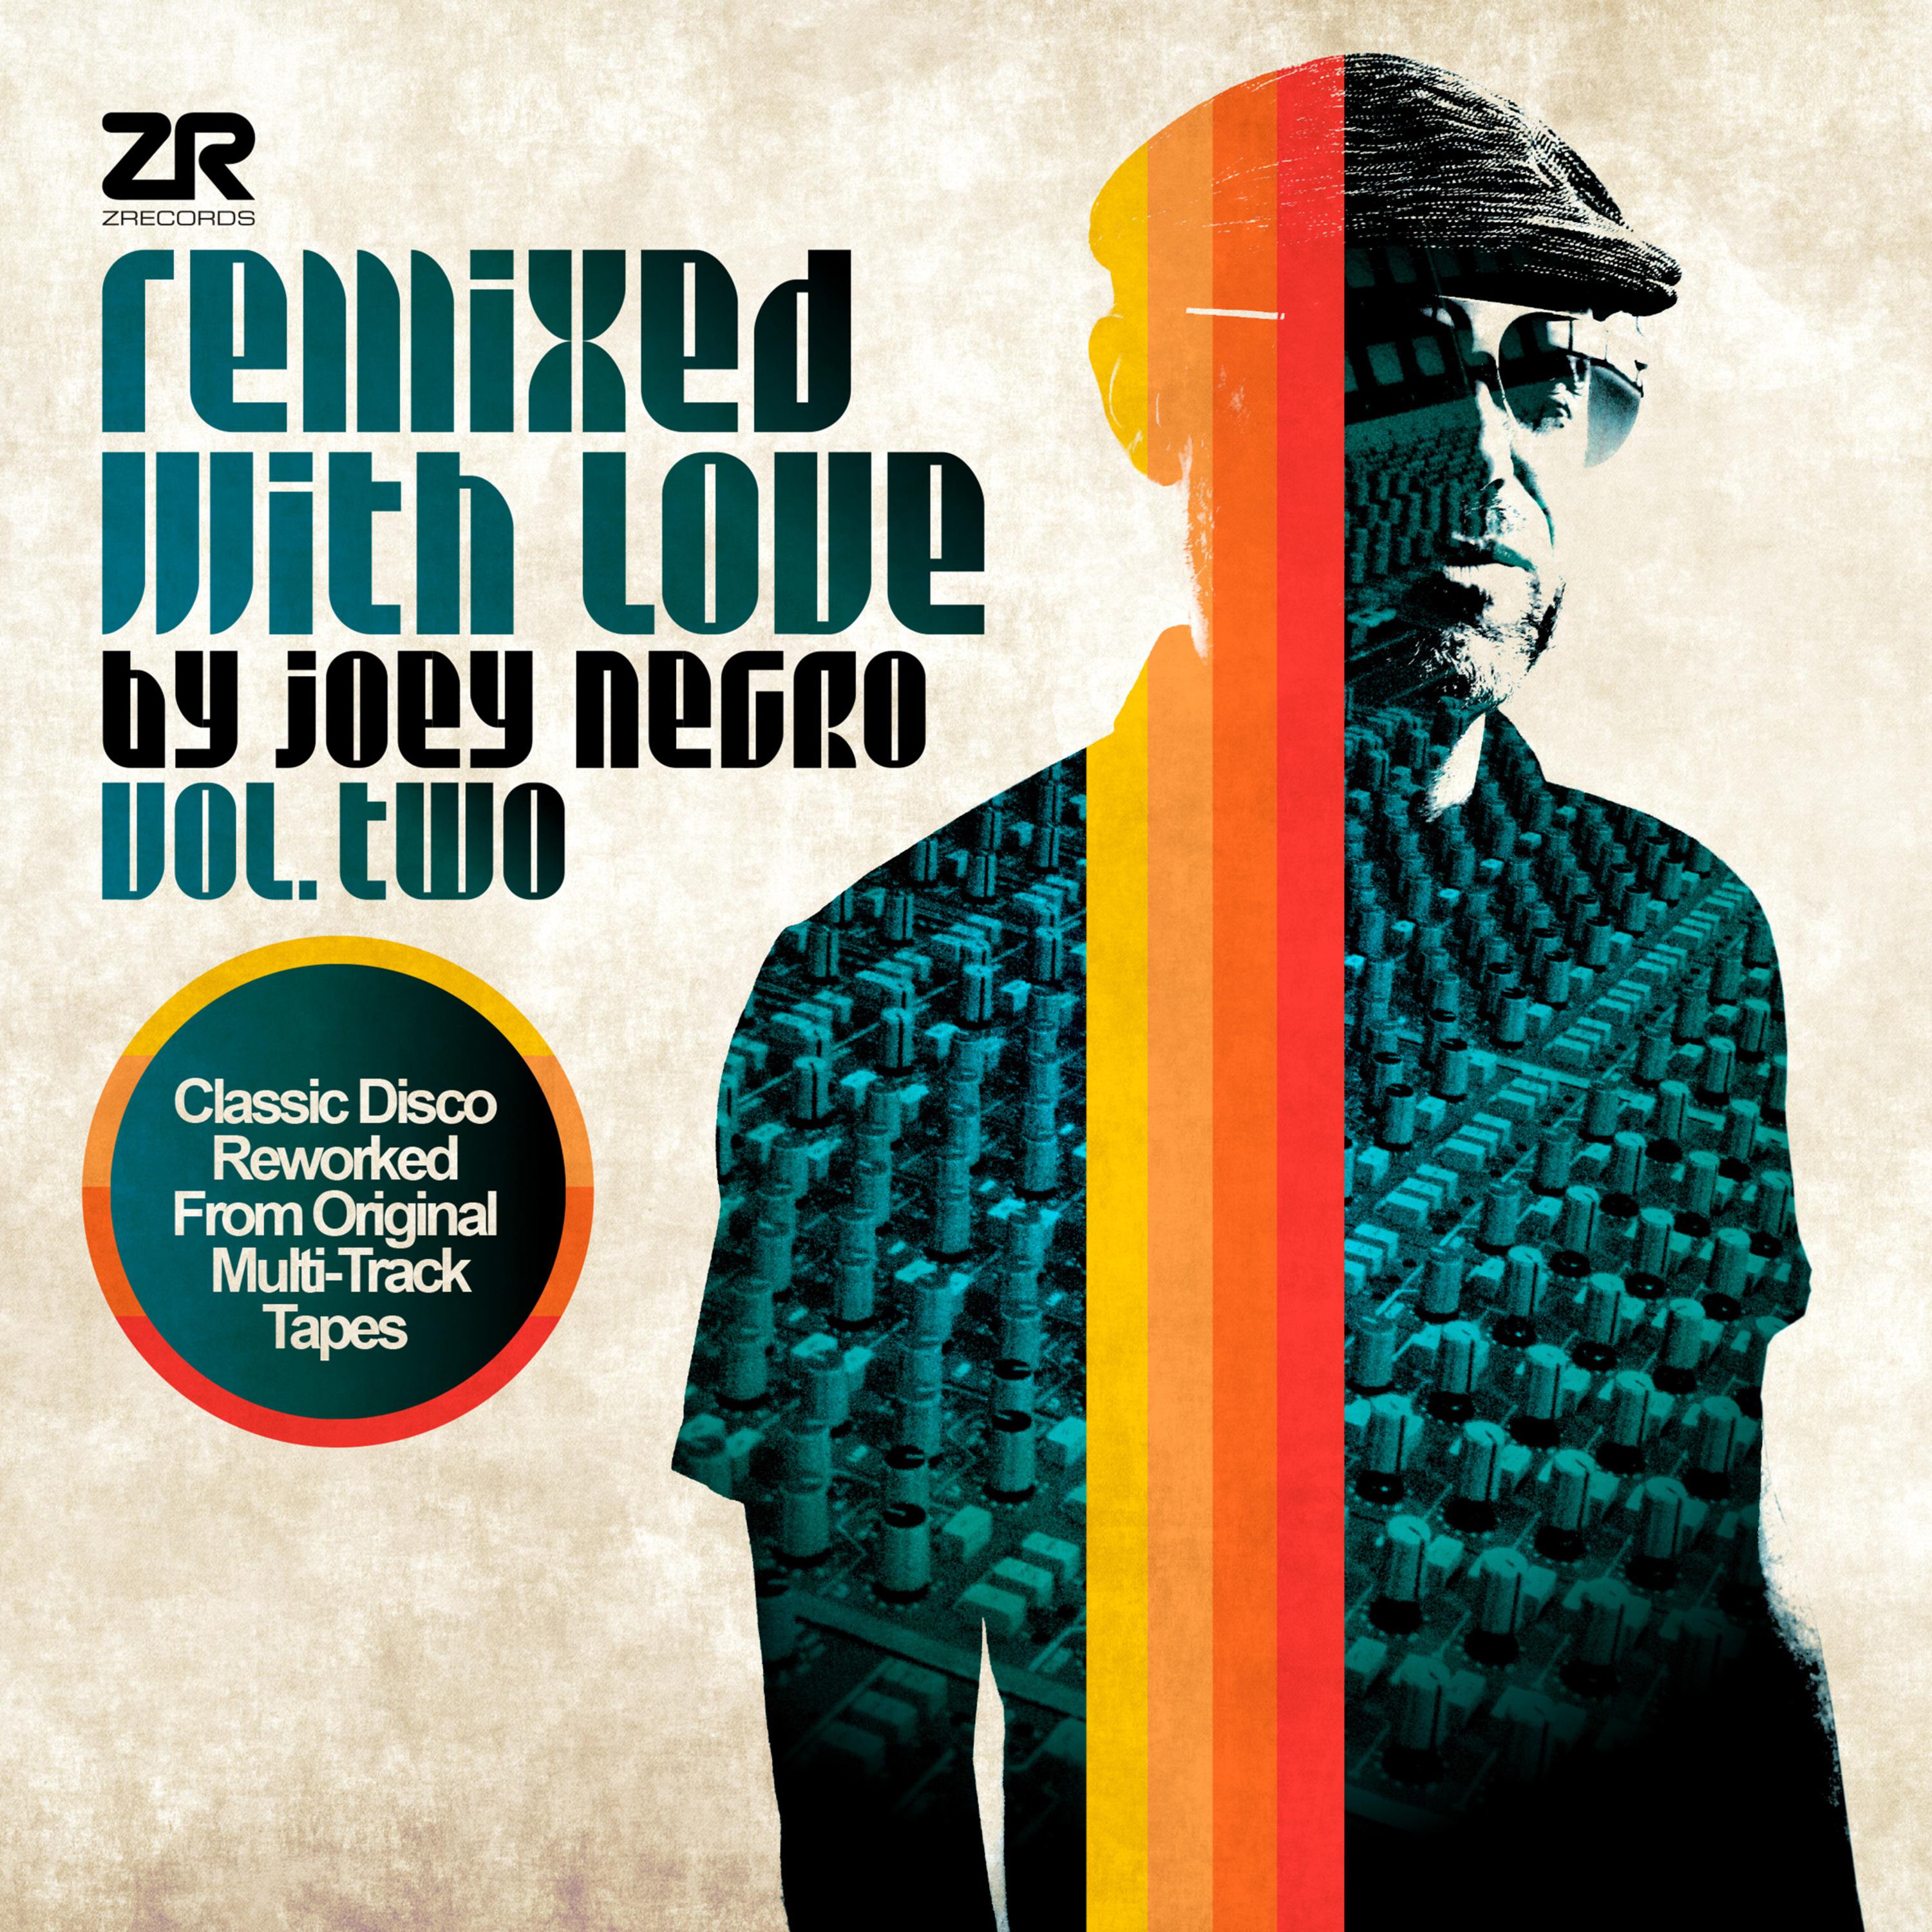 Only Time Will Tell (Joey Negro Club Mix)